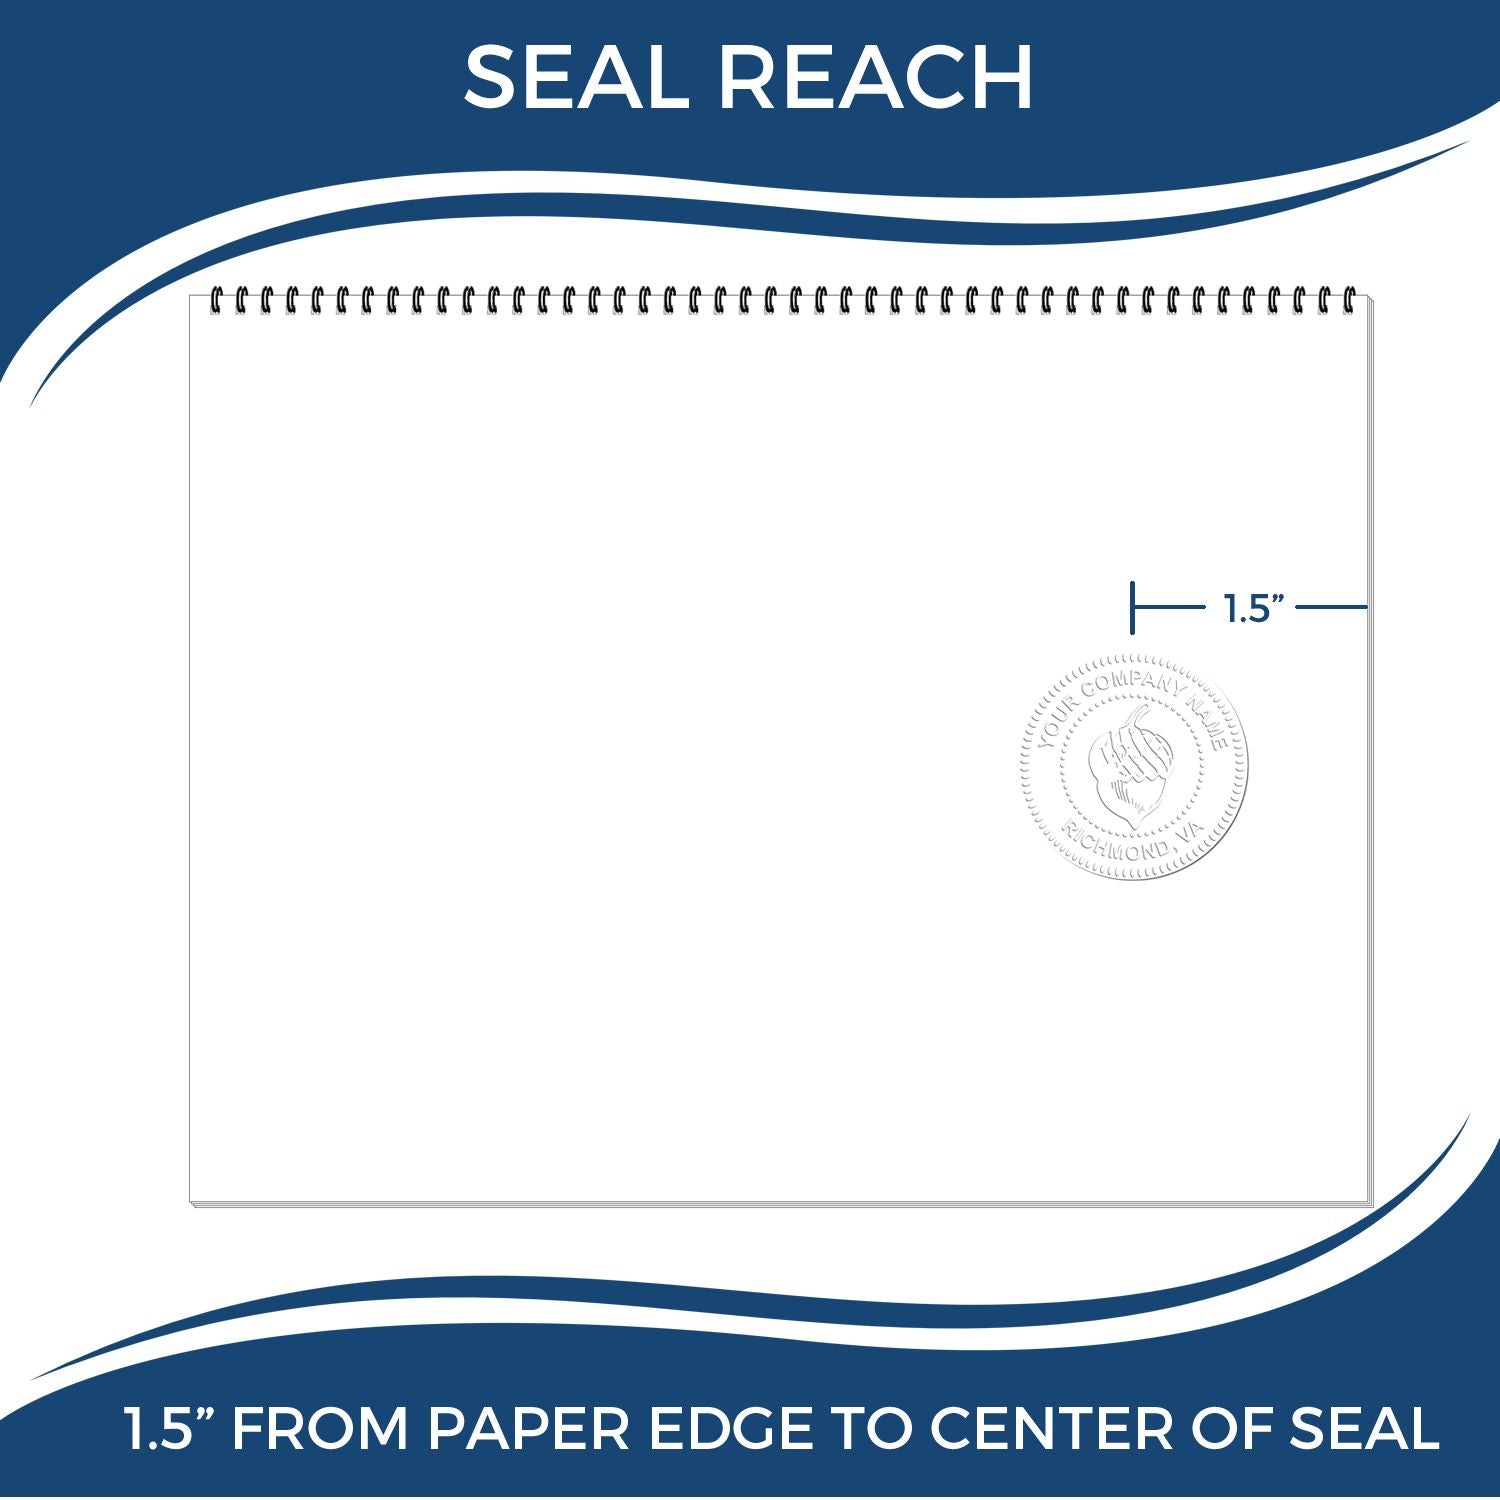 An infographic showing the seal reach which is represented by a ruler and a miniature seal image of the State of Connecticut Handheld Landscape Architect Seal